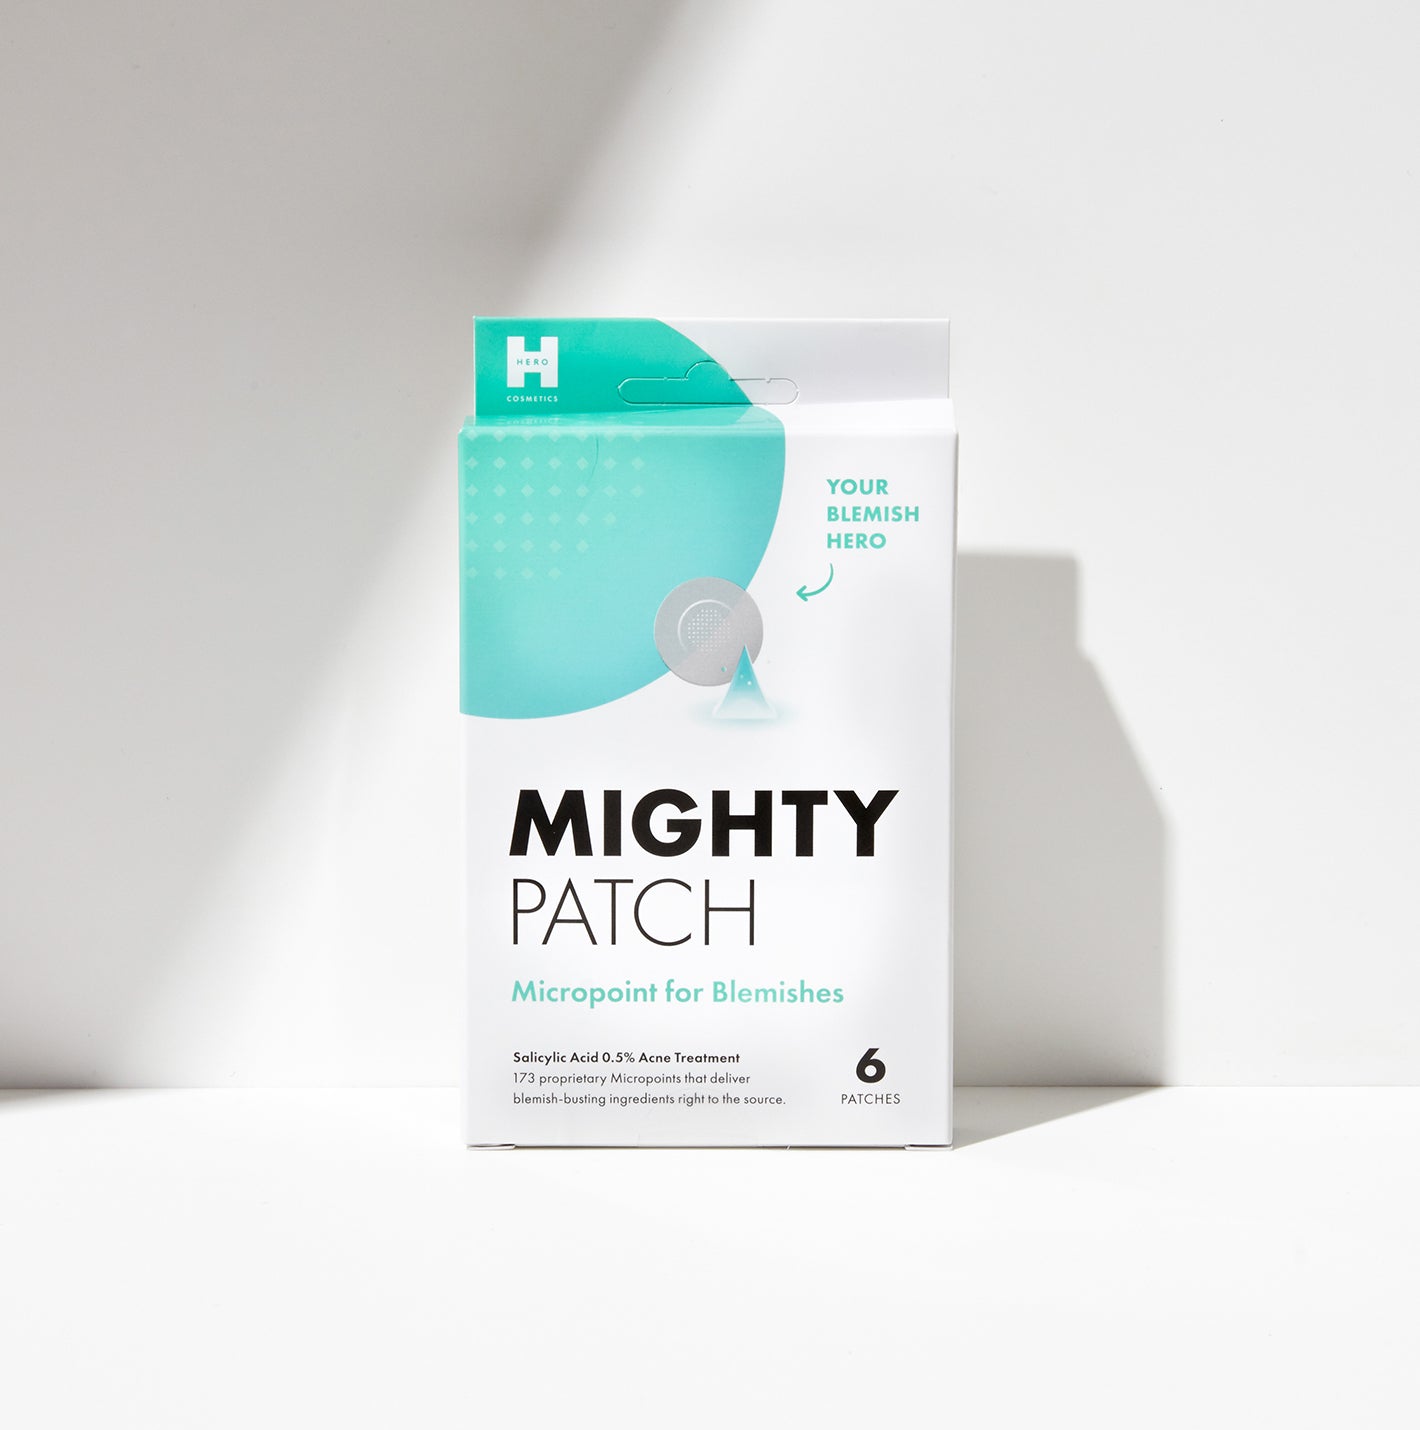 Hero Cosmetics Launches the Mighty Patch for Fine Lines Tested